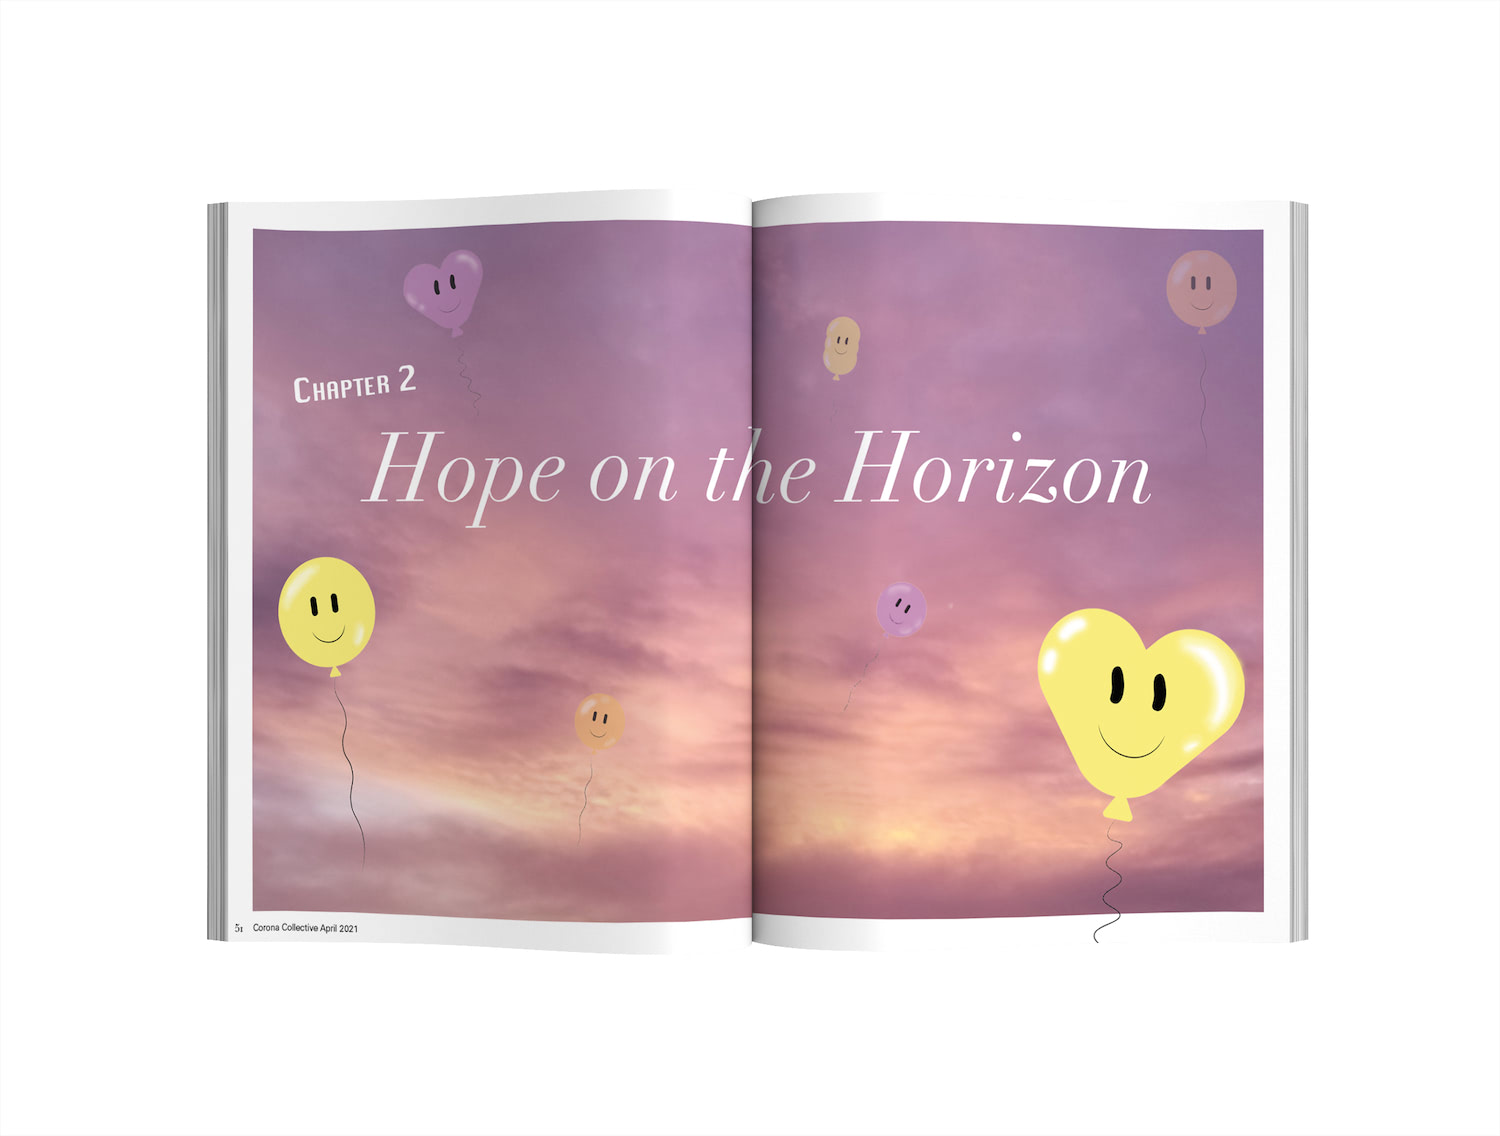 The chapter reads: Chapter 2, Hope on the Horizon. The image is a purple and yellow sky that could be either sunset or sunrise and shows the sun peeking through the clouds. On top of this, there are yellow, orange, and light purple balloons floating through the sky image with smiley faces on them. The balloons are either in the shapes of hearts, typical circles, or obscure shapes. The mood is dreamy and hopeful.